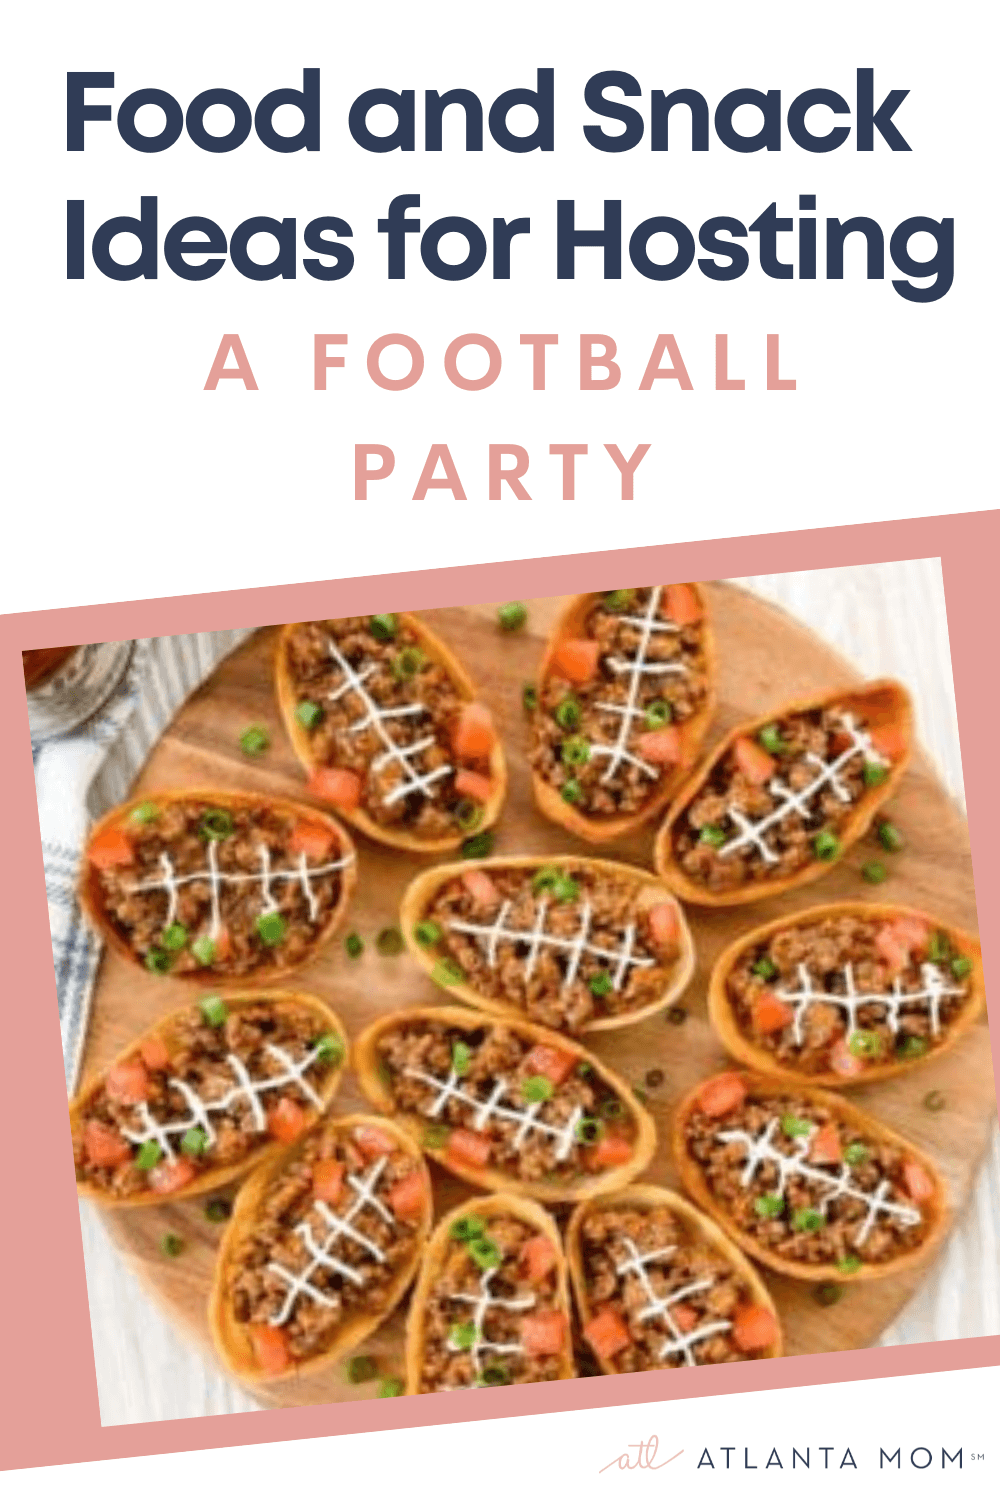 Food and Snack Ideas for Hosting a Football Party